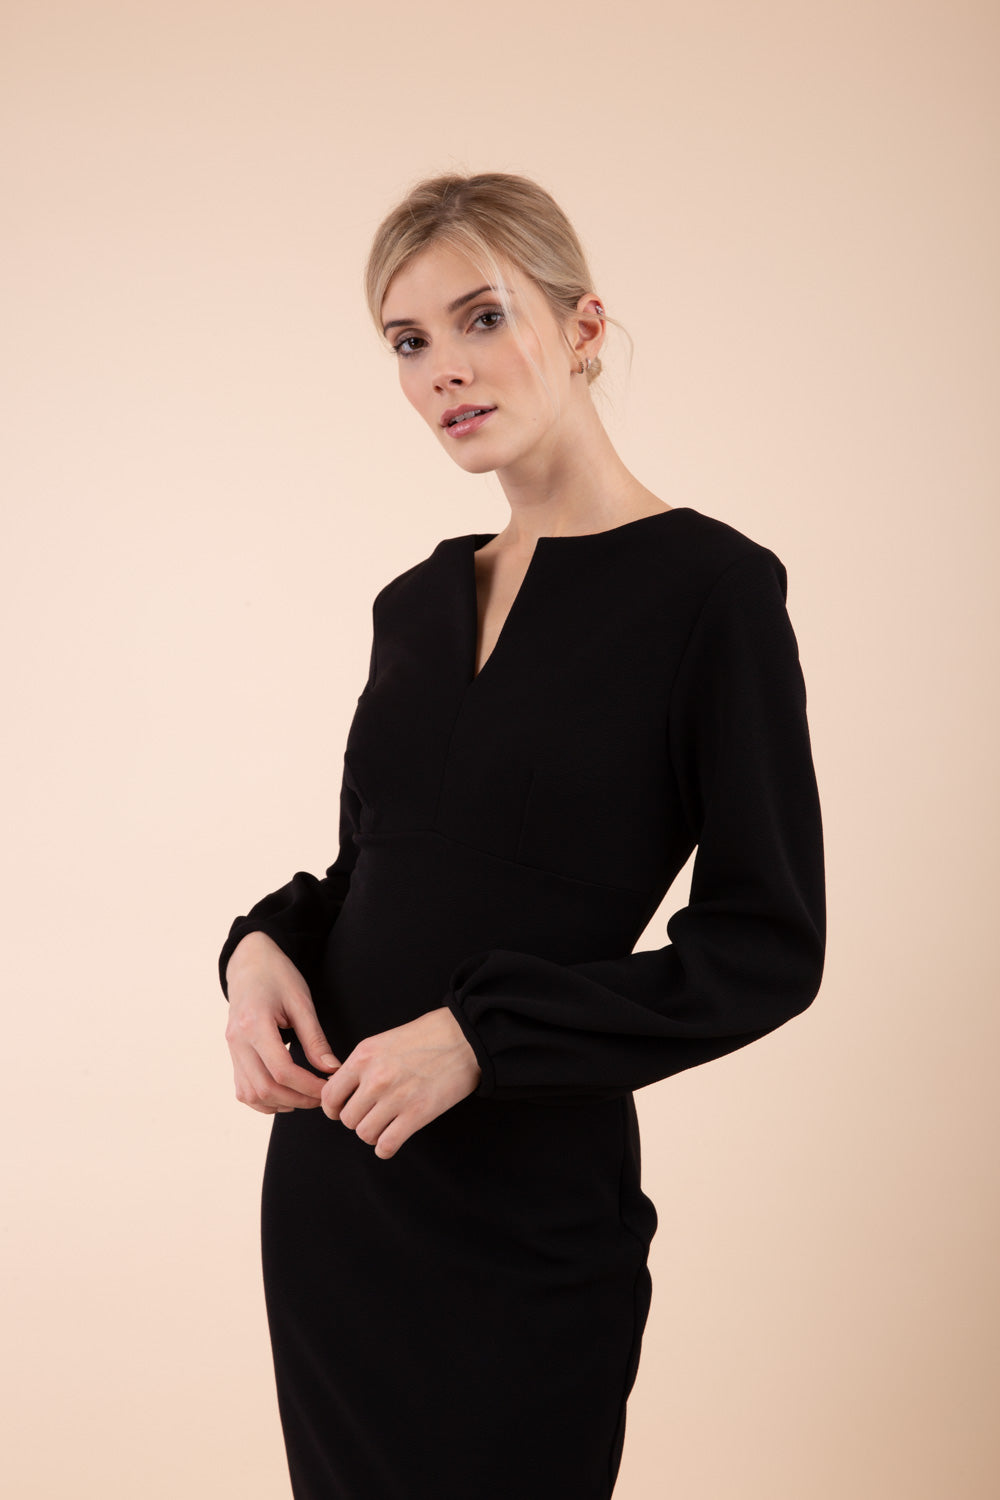 Blonde model wearing Diva Catwalk Praktica long puffed bishop sleeves knee length empire line pencil dress with round neckline with a slit cut in the middle in Black front